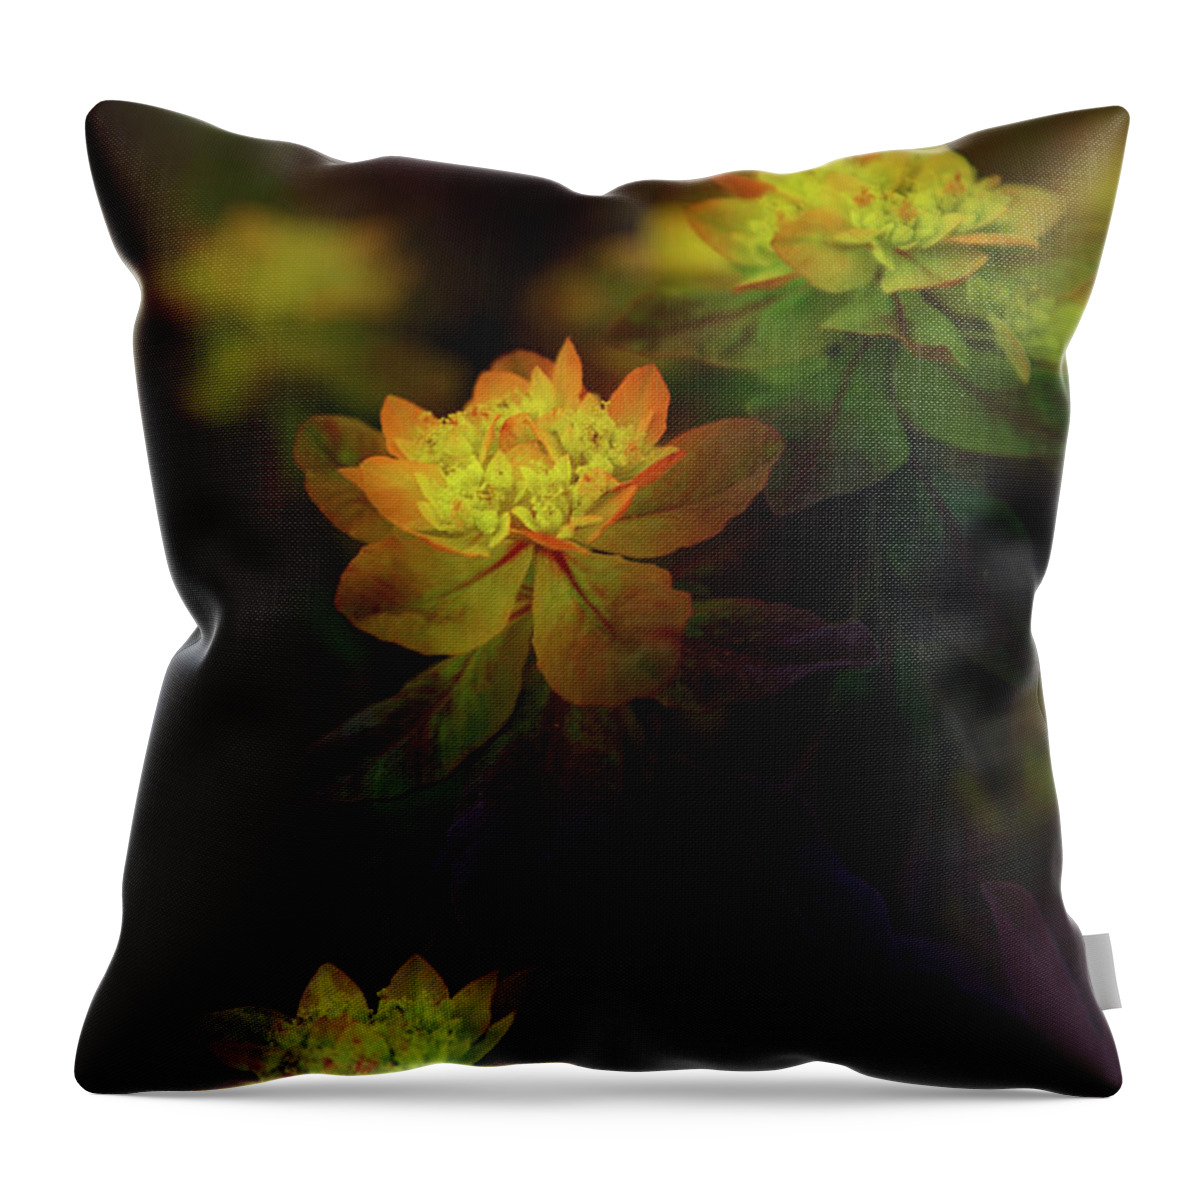 John Strong Arts Throw Pillow featuring the photograph Out of Darkness by John Strong